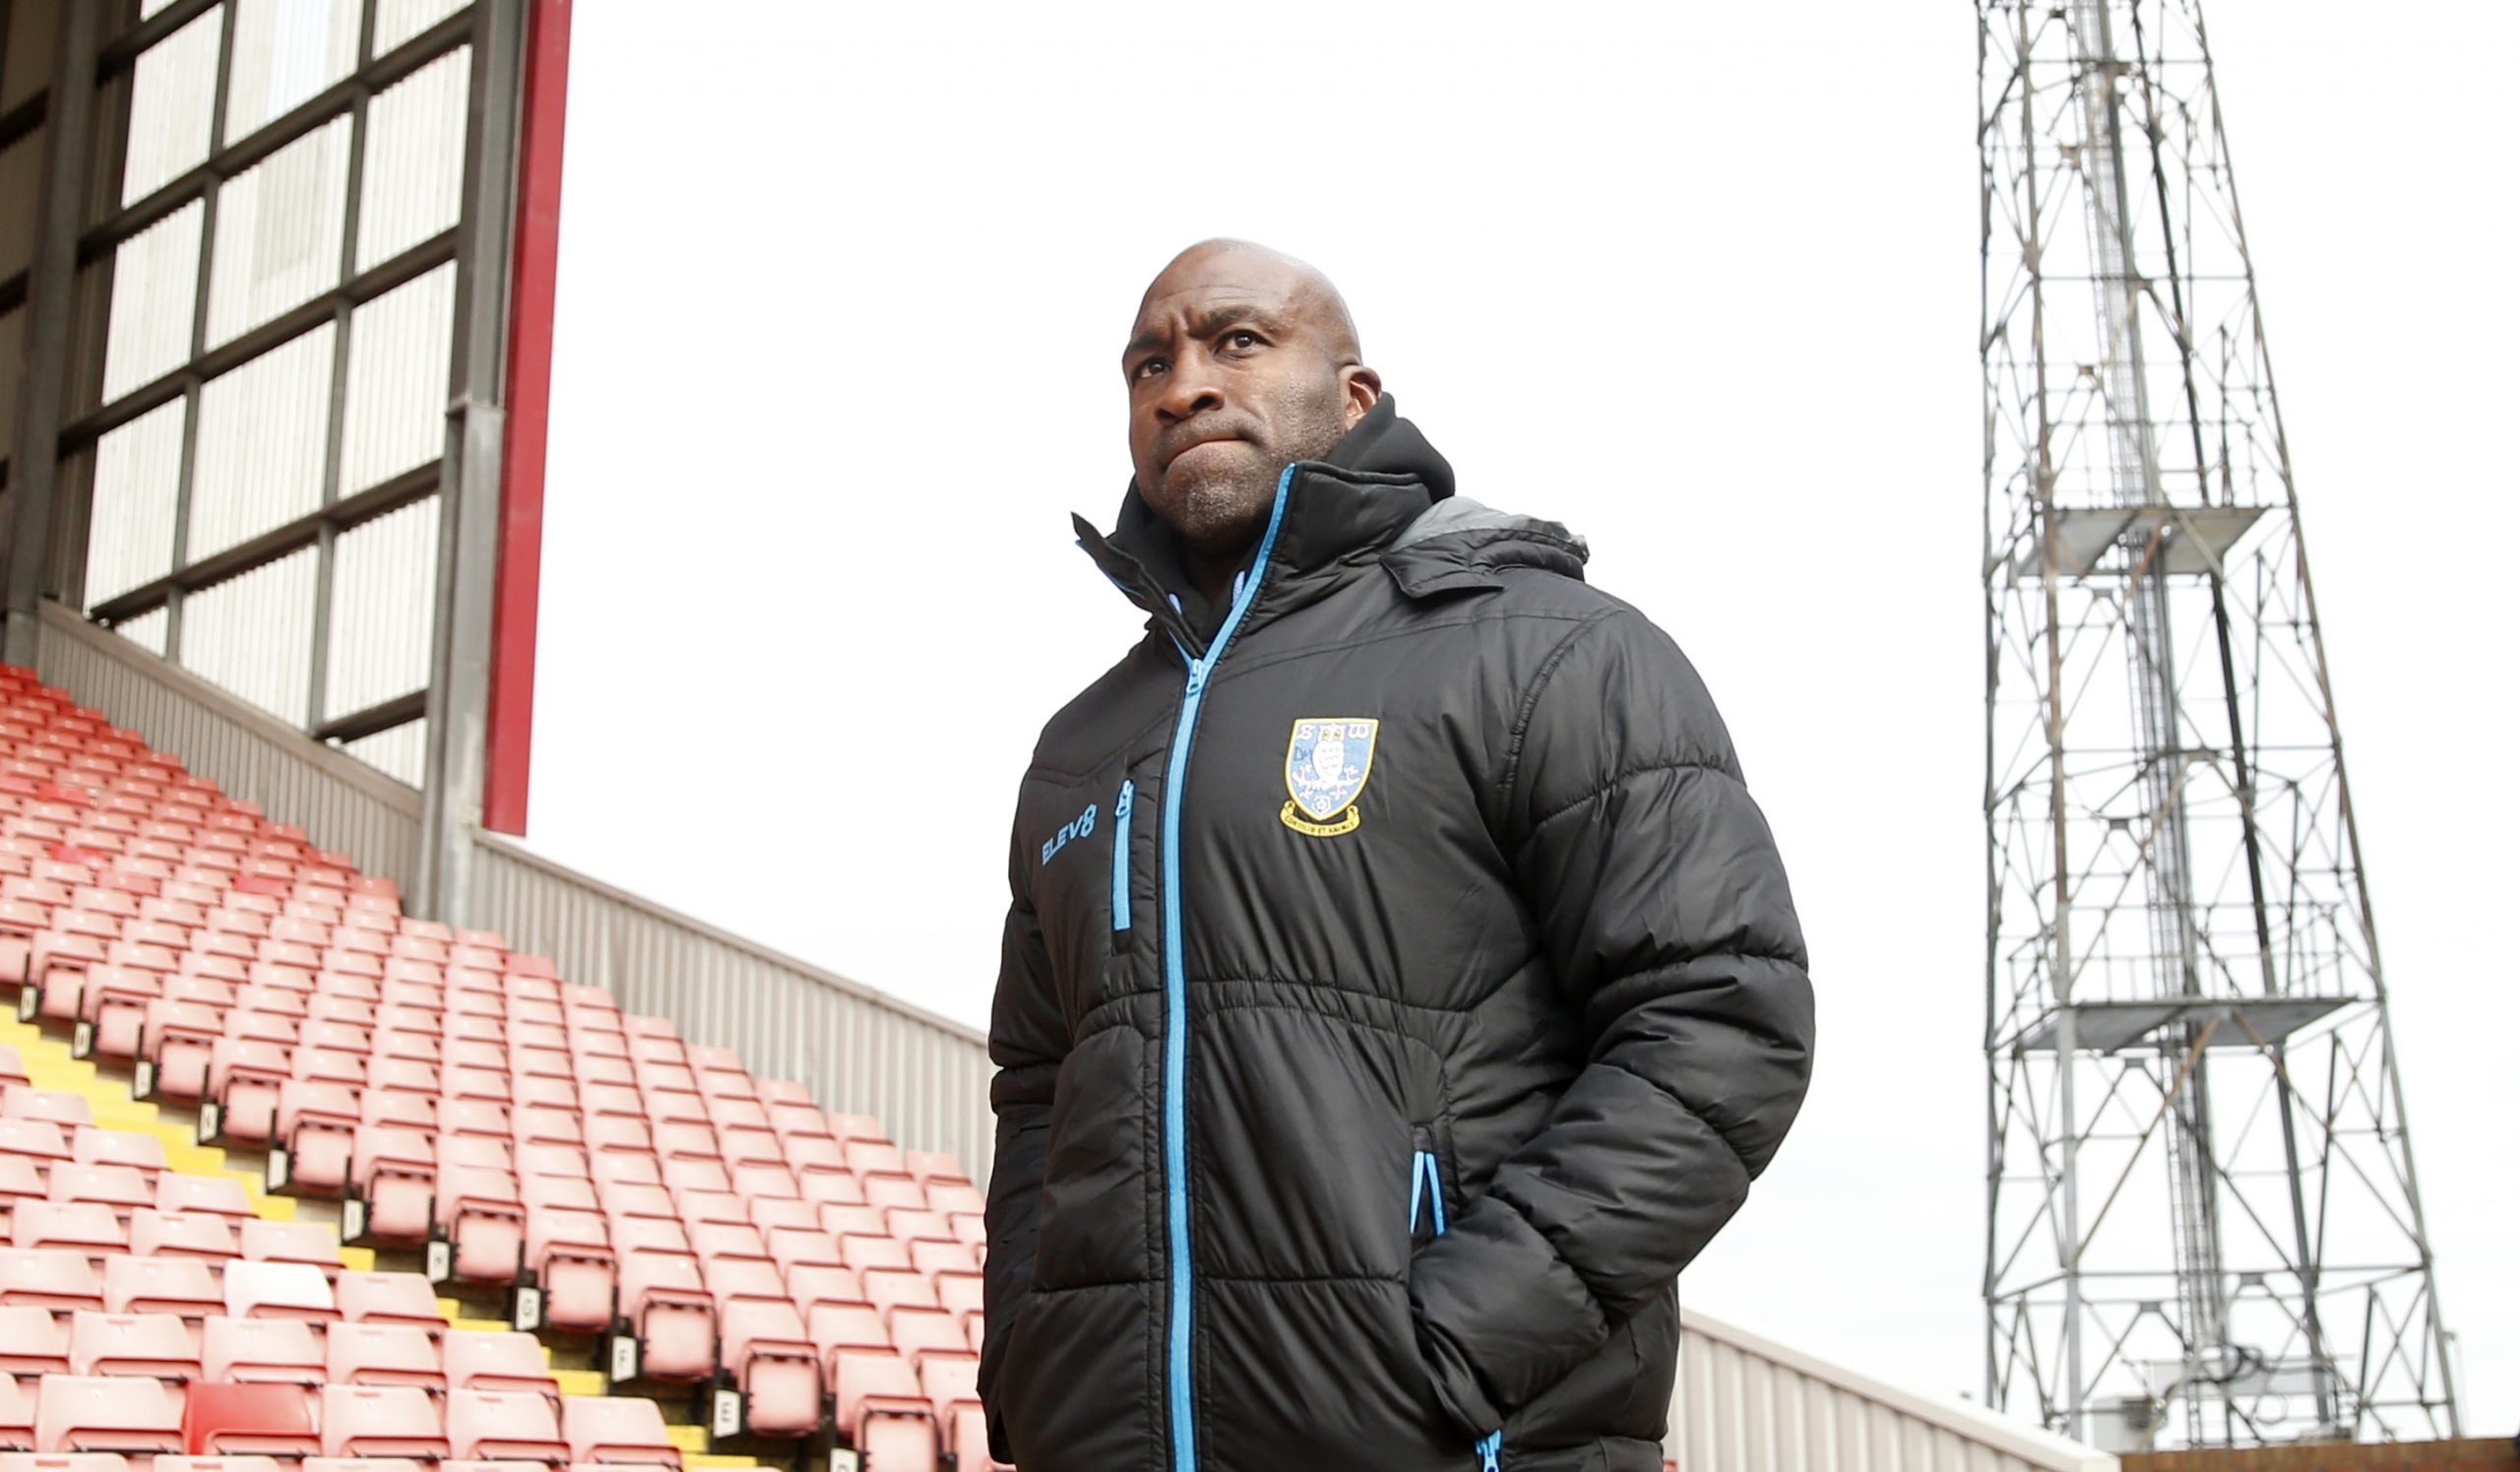 Soccer Football - Championship - Barnsley v Sheffield Wednesday - Oakwell, Barnsley, Britain - March 20, 2021  Sheffield Wednesday manager Darren Moore Action Images/Andrew Boyers EDITORIAL USE ONLY. No use with unauthorized audio, video, data, fixture lists, club/league logos or 'live' services. Online in-match use limited to 75 images, no video emulation. No use in betting, games or single club /league/player publications.  Please contact your account representative for further details.